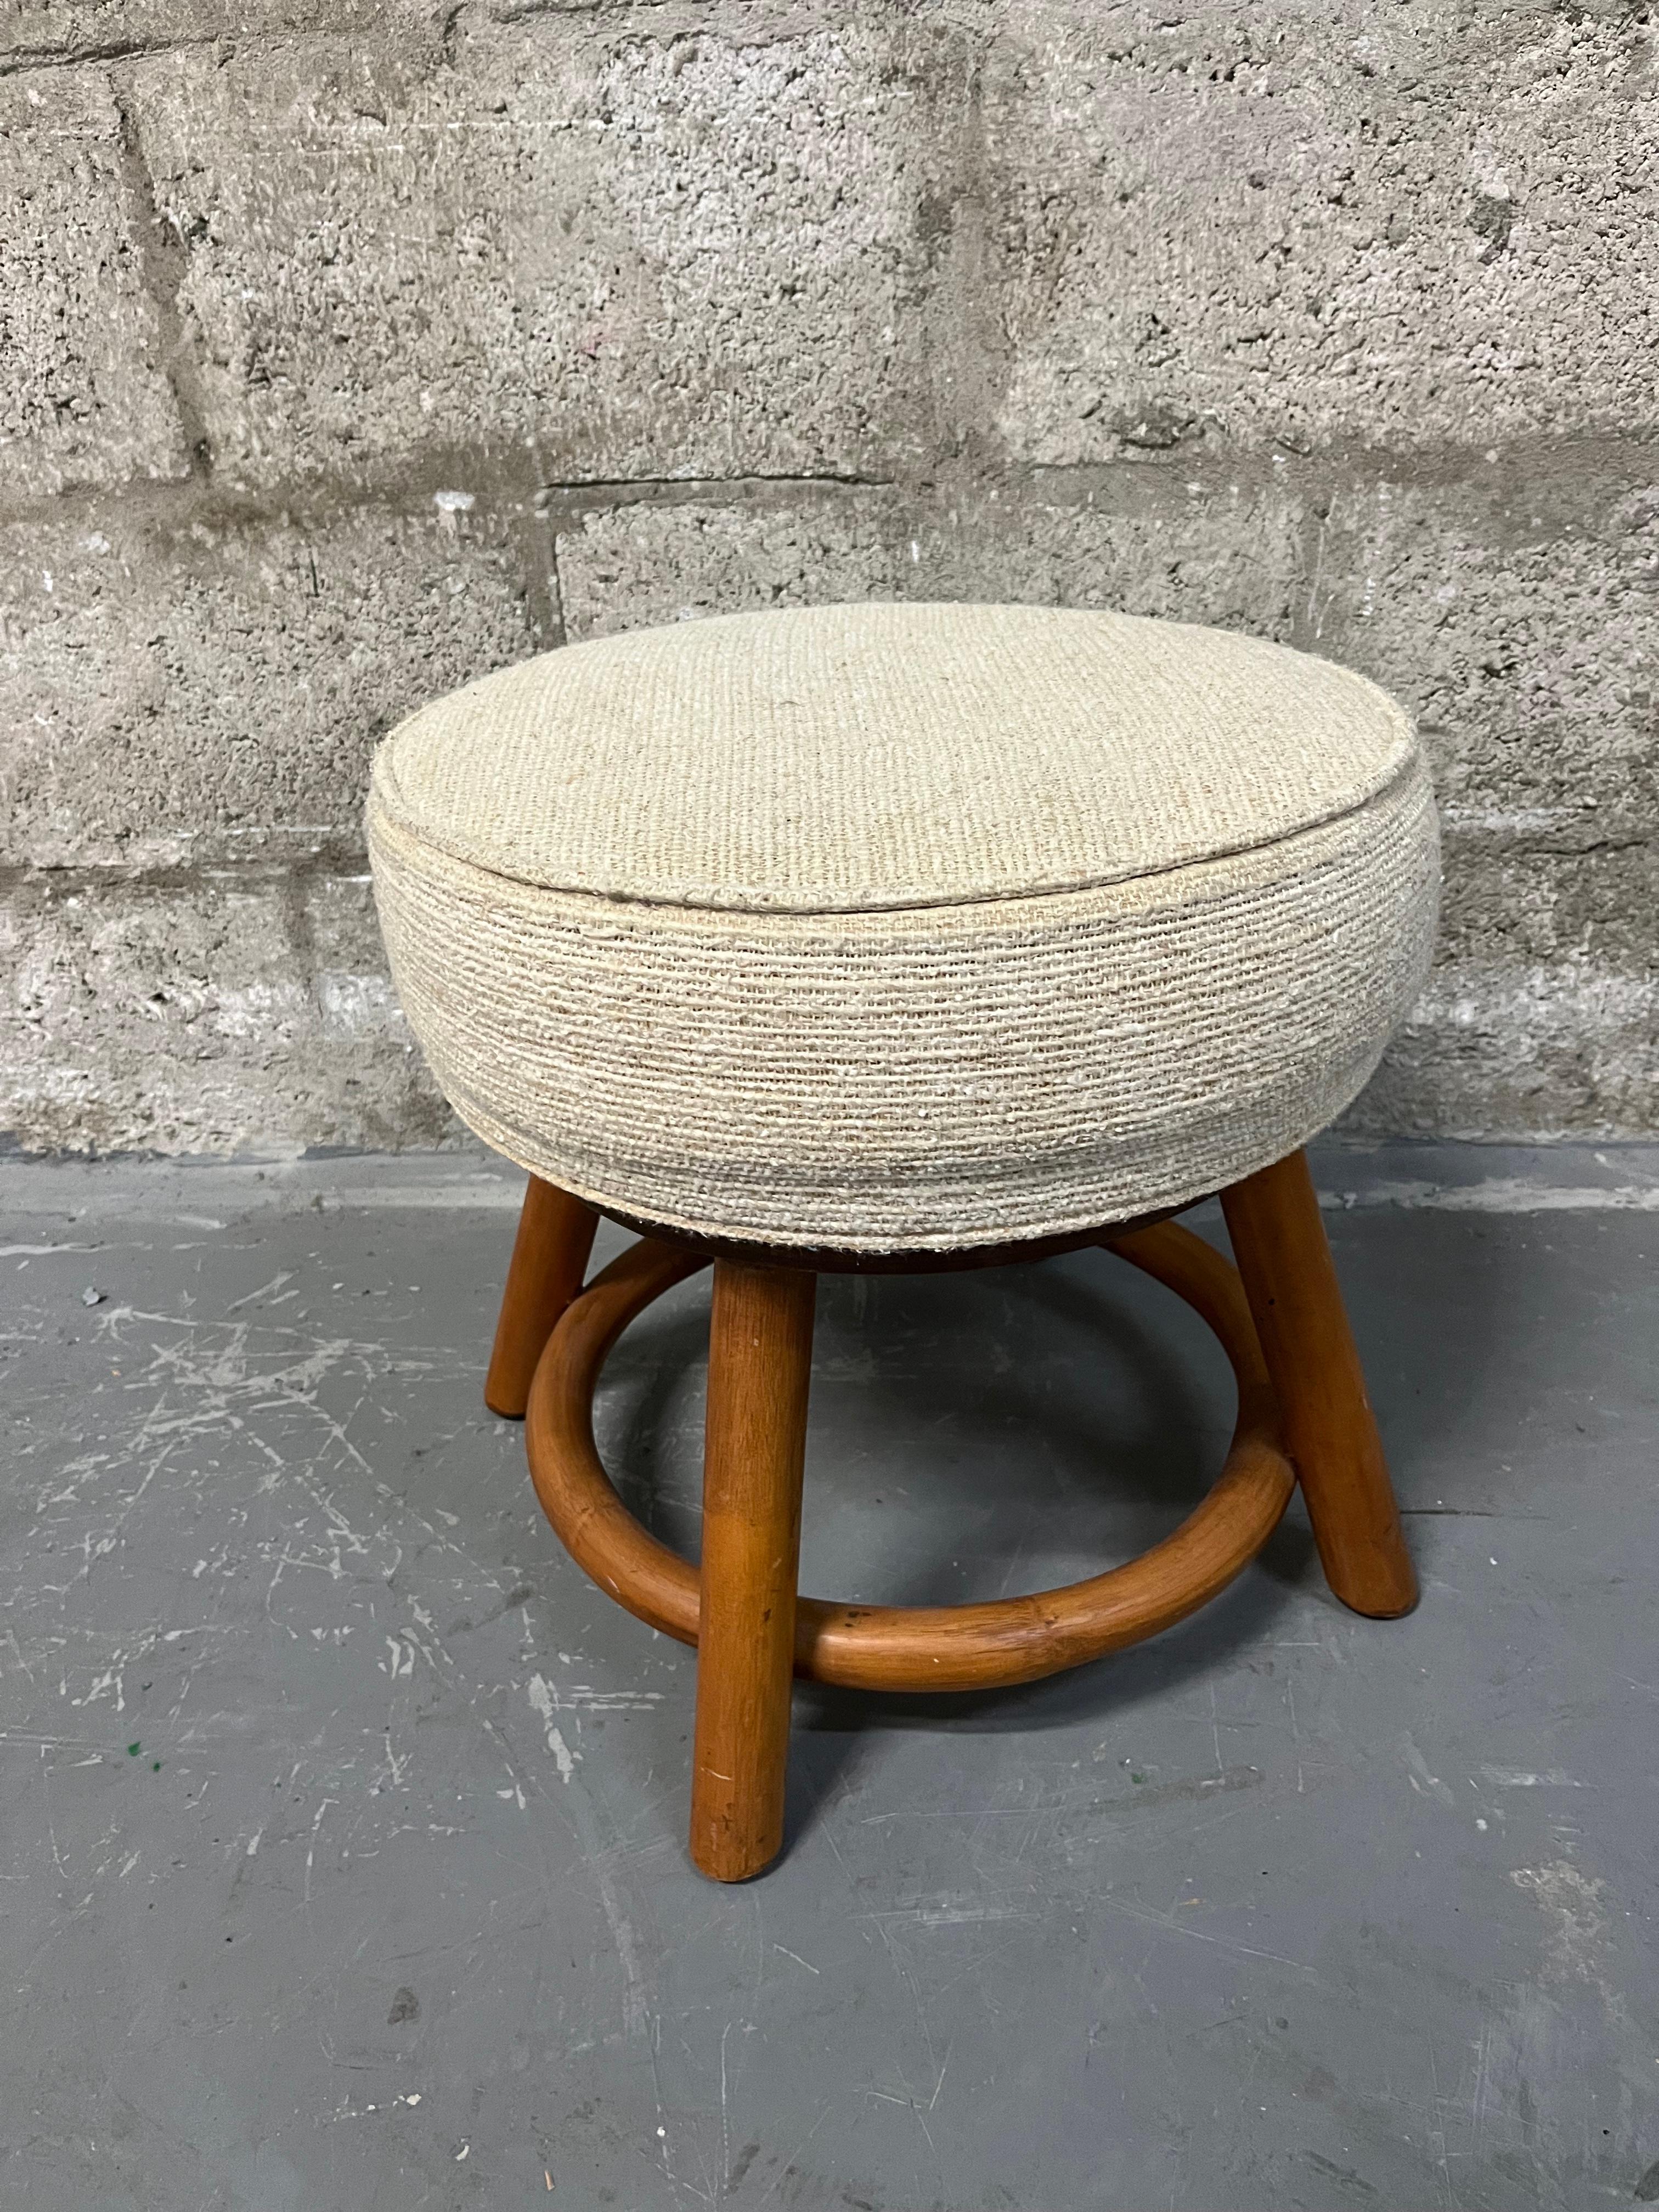 Bamboo Rattan Wicker Swivel Footstool in the Paul Frankl's Style. Circa 1970s  For Sale 1